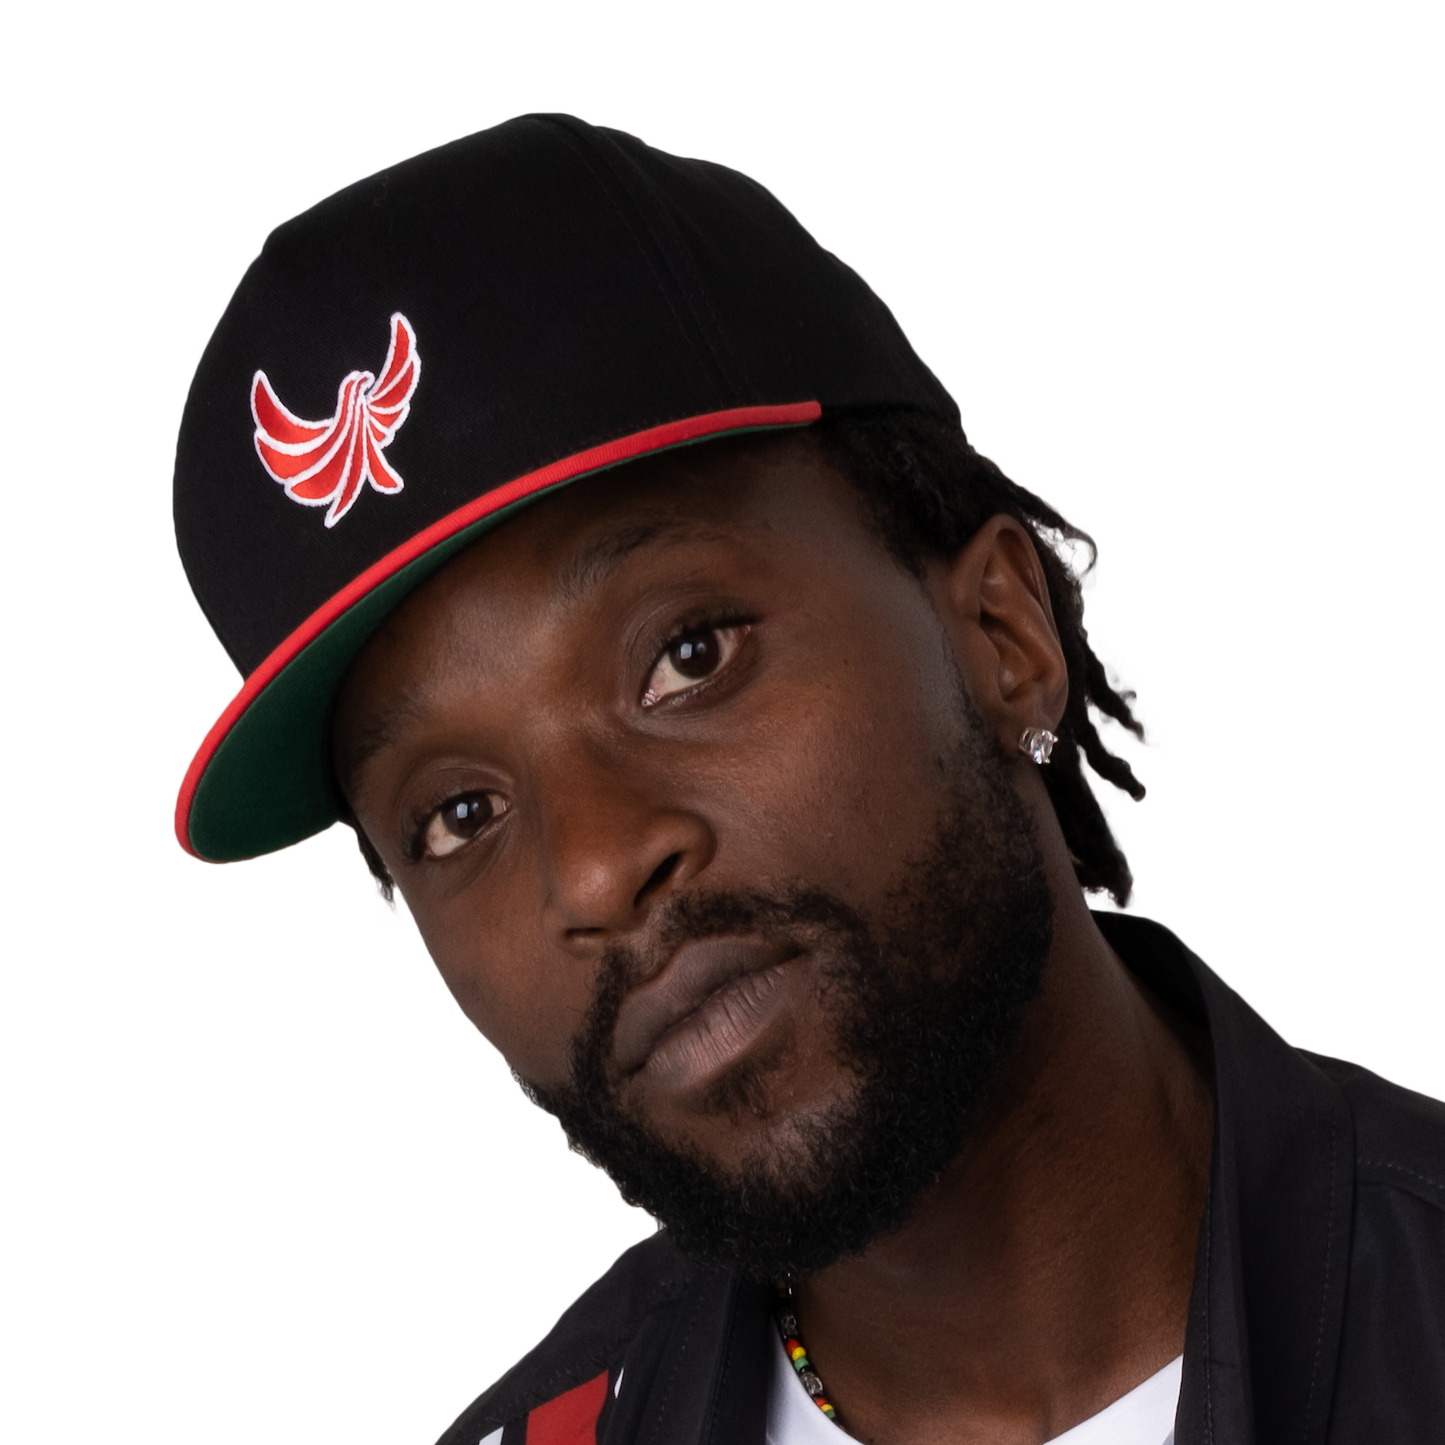 Red and Black High Profile 5 Panel Snap-Back Flat Bill Cap-PEACE GANG